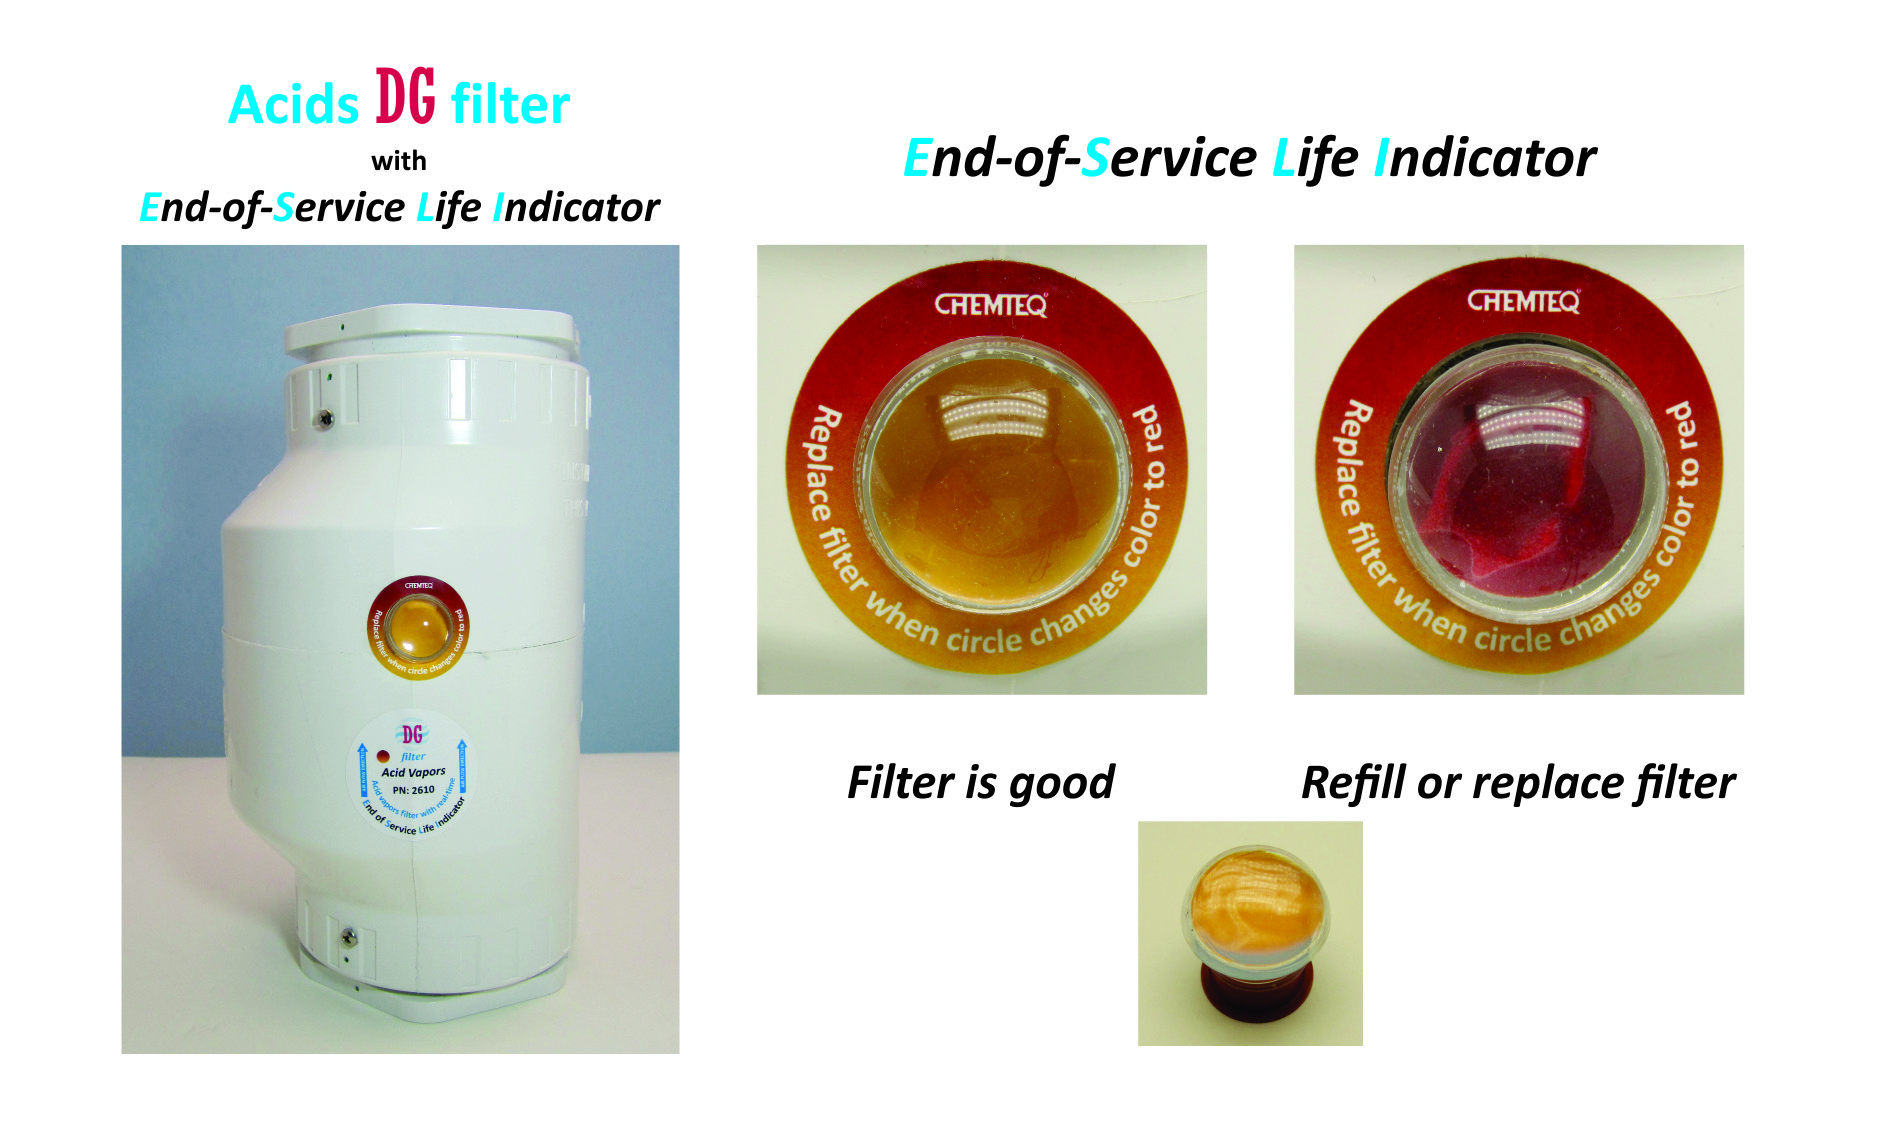 Acids DG Filter with end of service life indicator